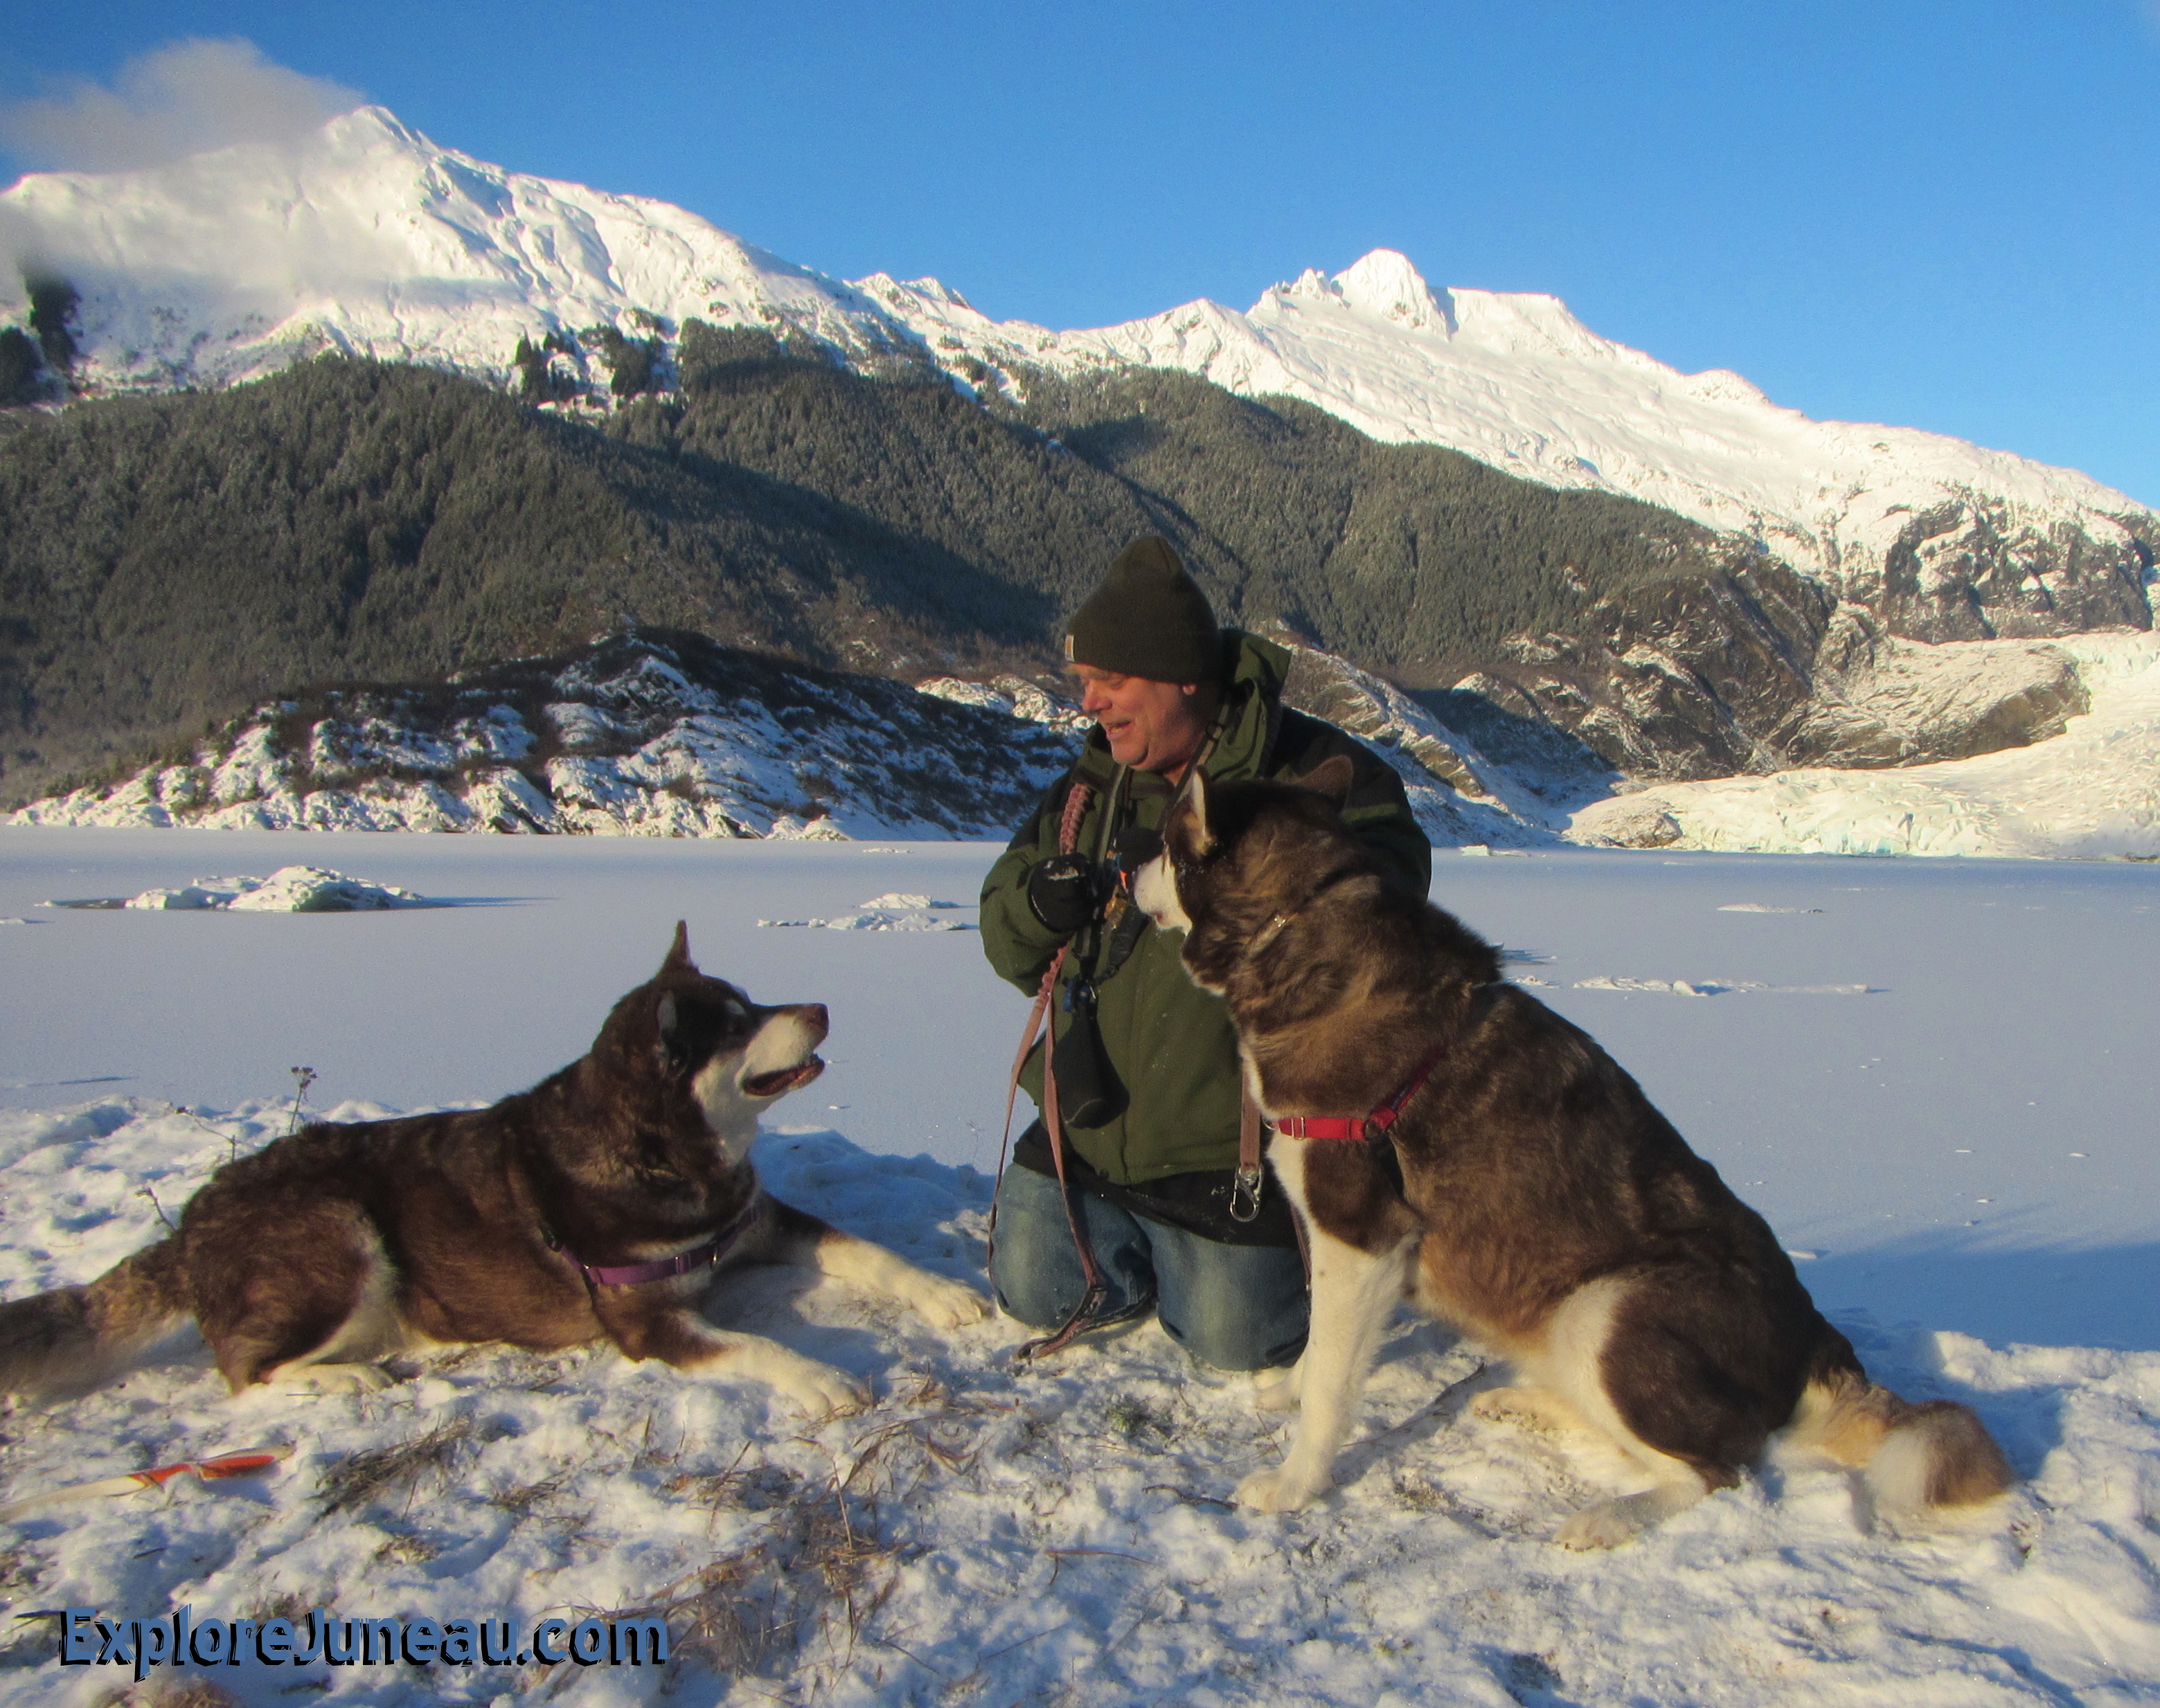 Skadi & Freya with Russell Josh Peterson in Juneau Alaska at Mendenhall Glacier December 13, 2015. Thank you for your Kindness and Support!